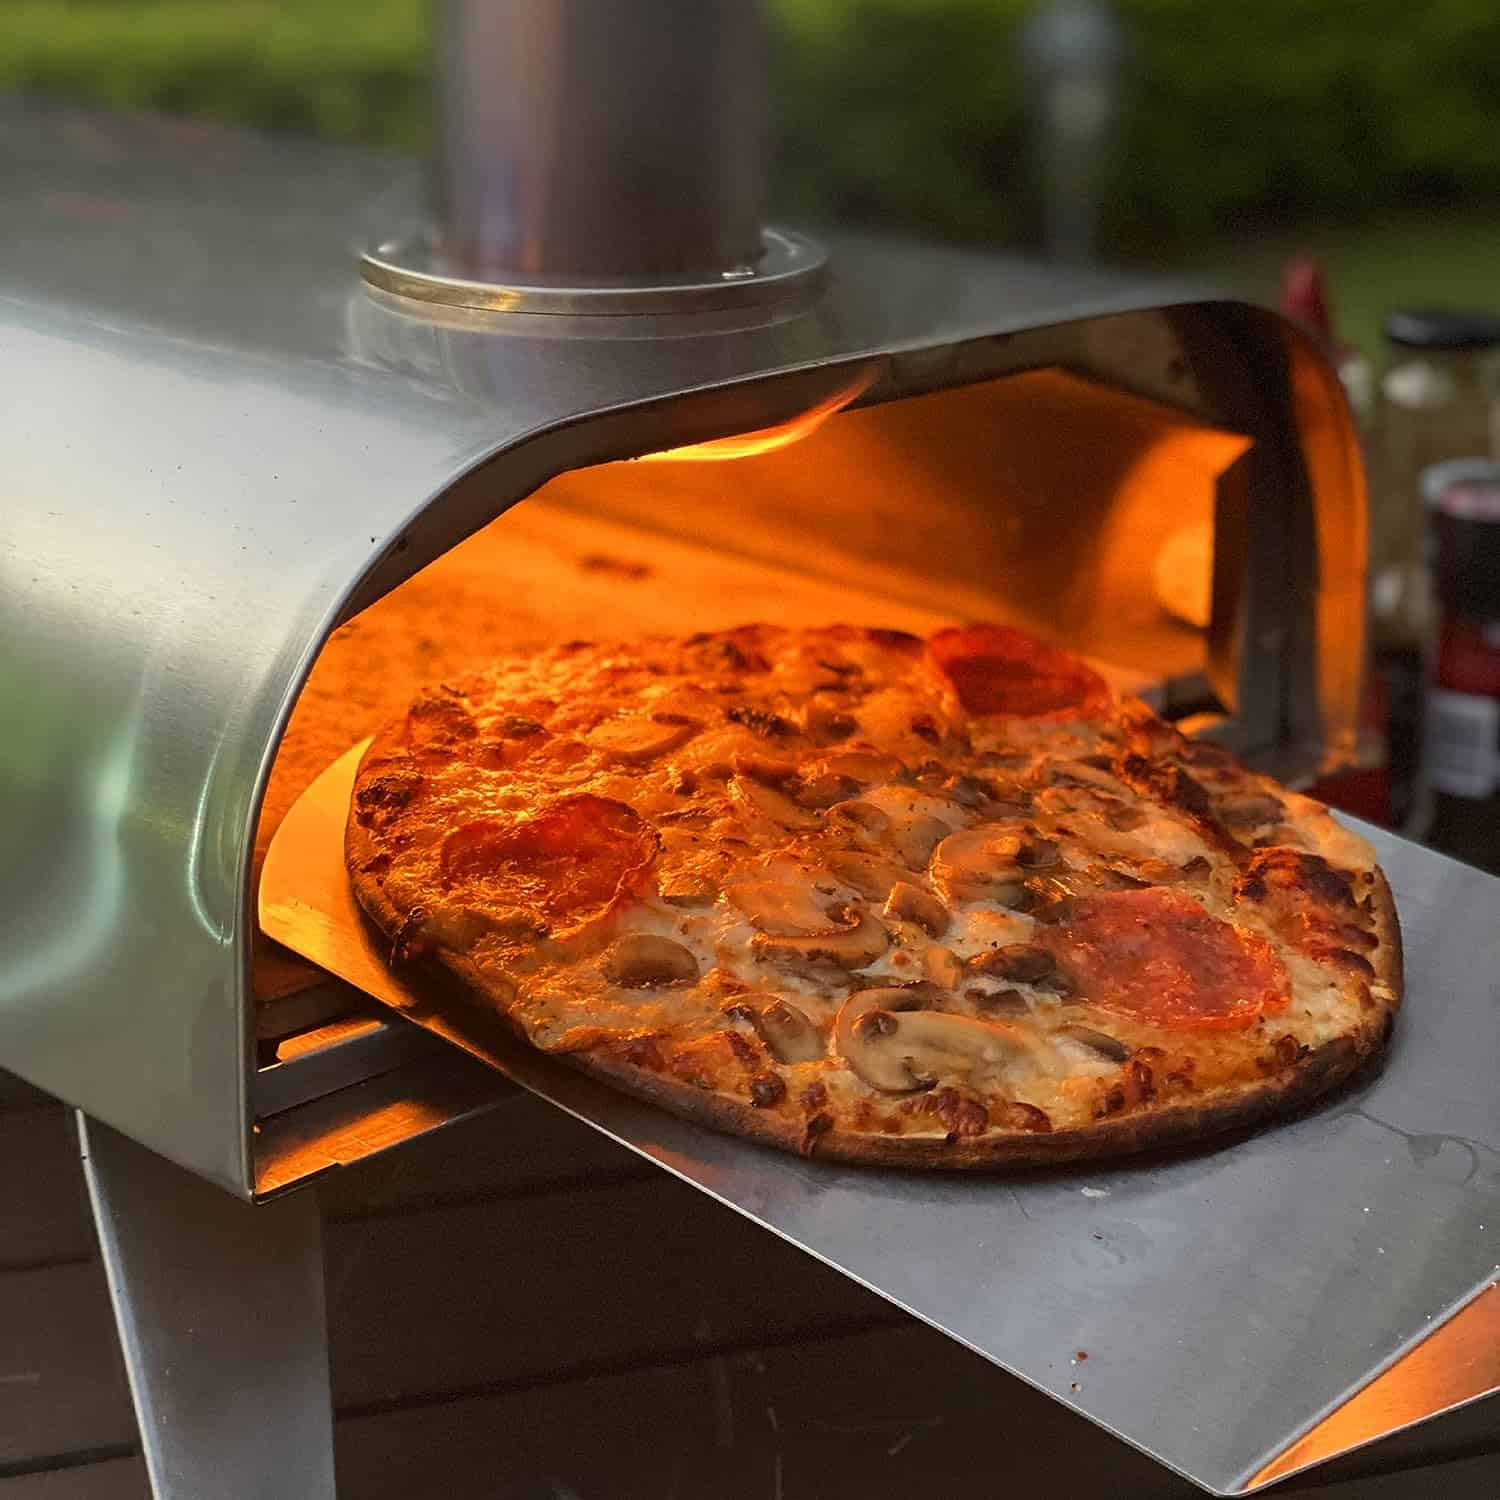 BIG HORN OUTDOORS 12 Inch Wood Pellet Burning Pizza Oven, Portable Stainless Steel Pizza Grill with Pizza Stone for Outside 5